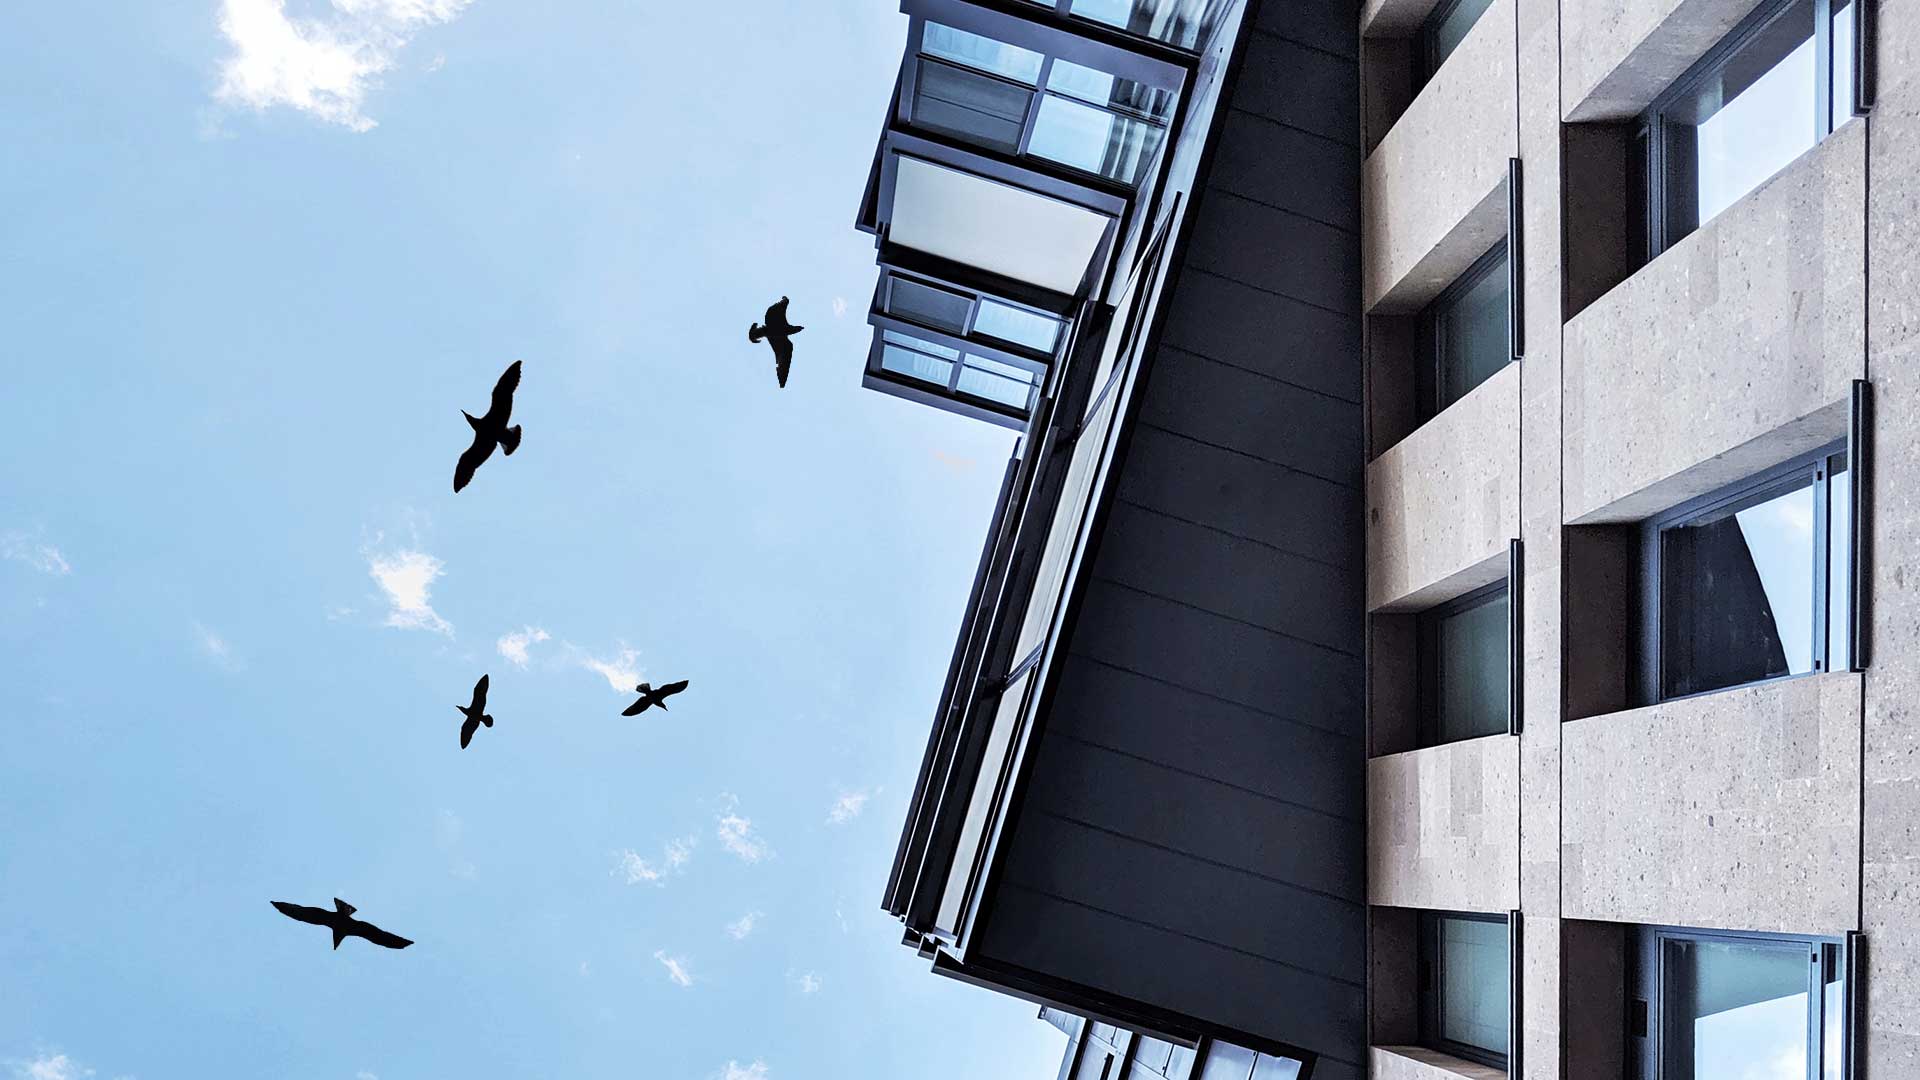 What You Should Know About Emerging Bird Deterrent Building Window Film Laws